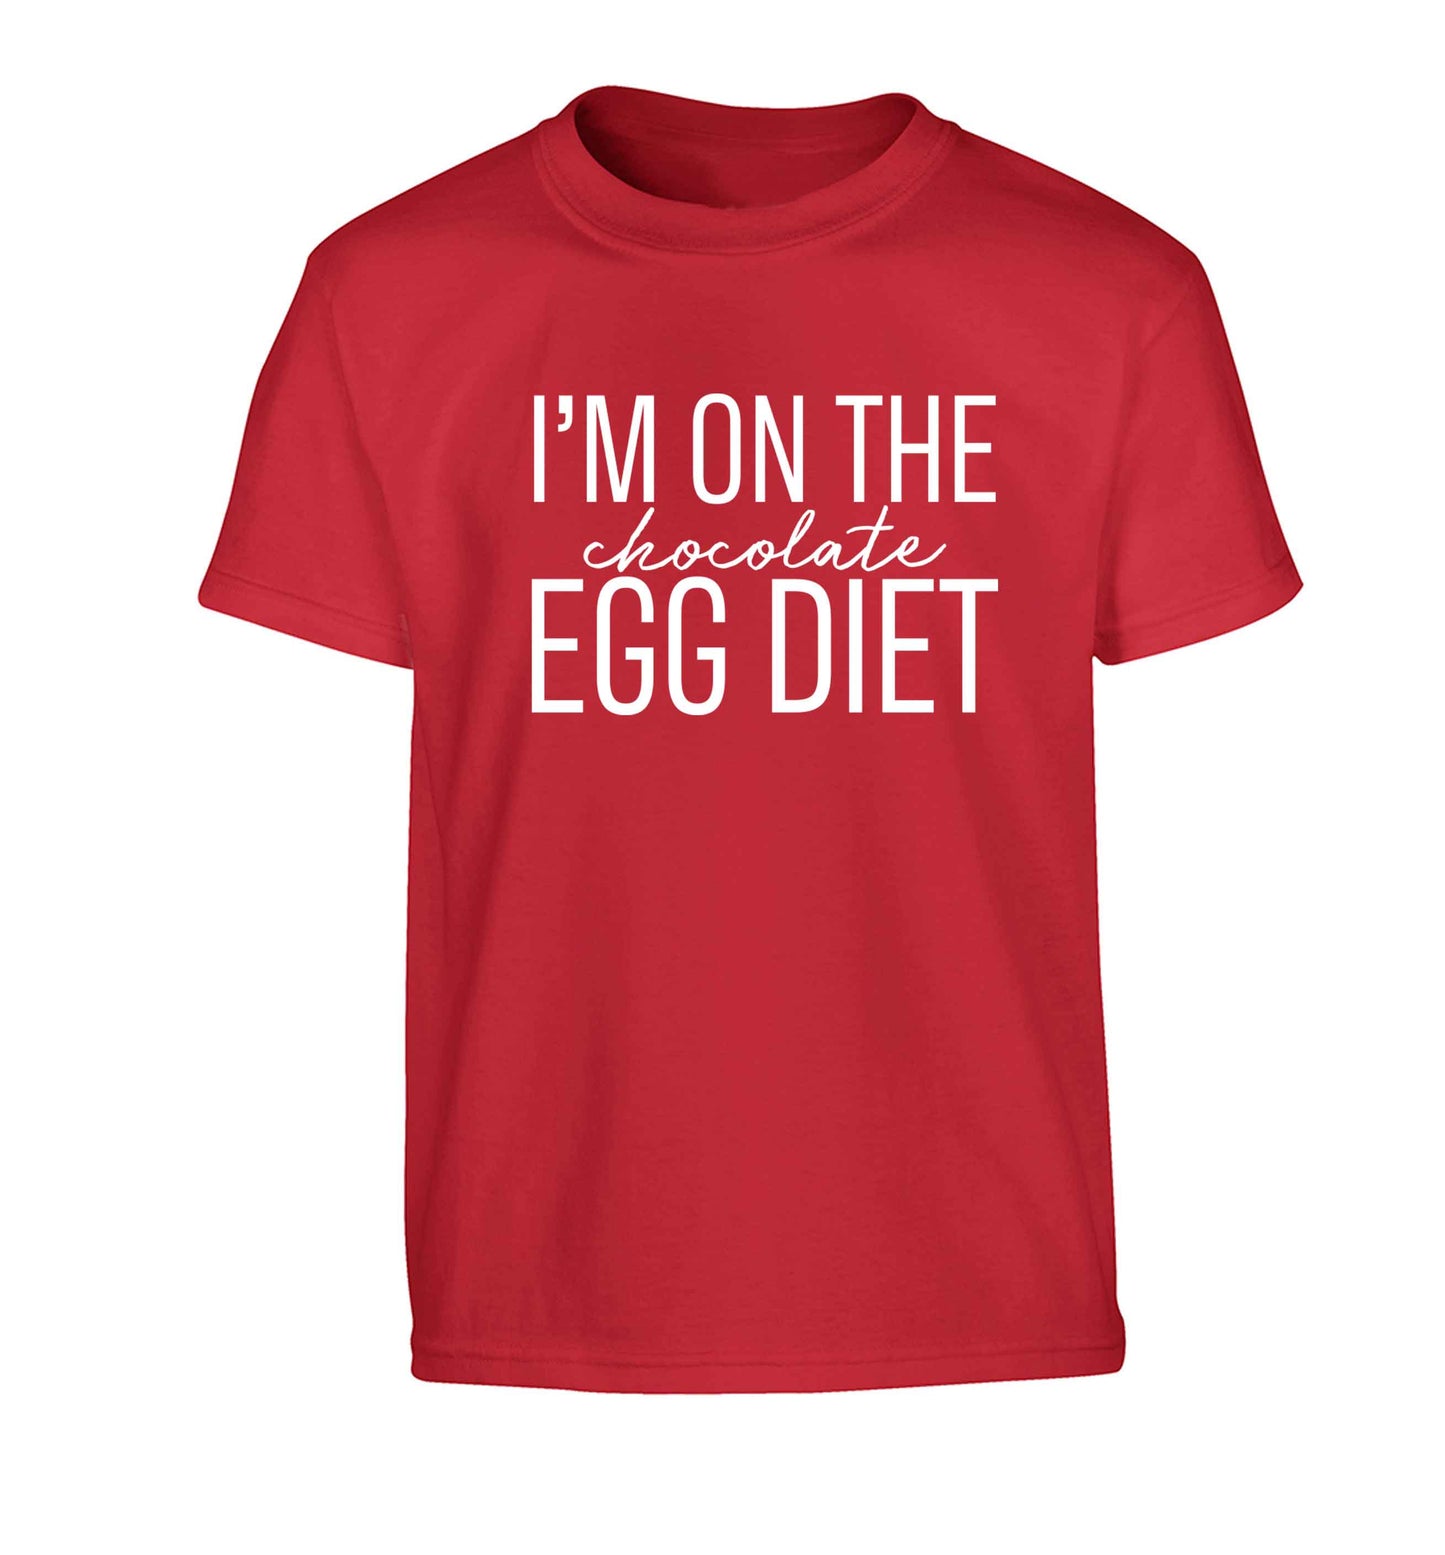 I'm on the chocolate egg diet Children's red Tshirt 12-13 Years